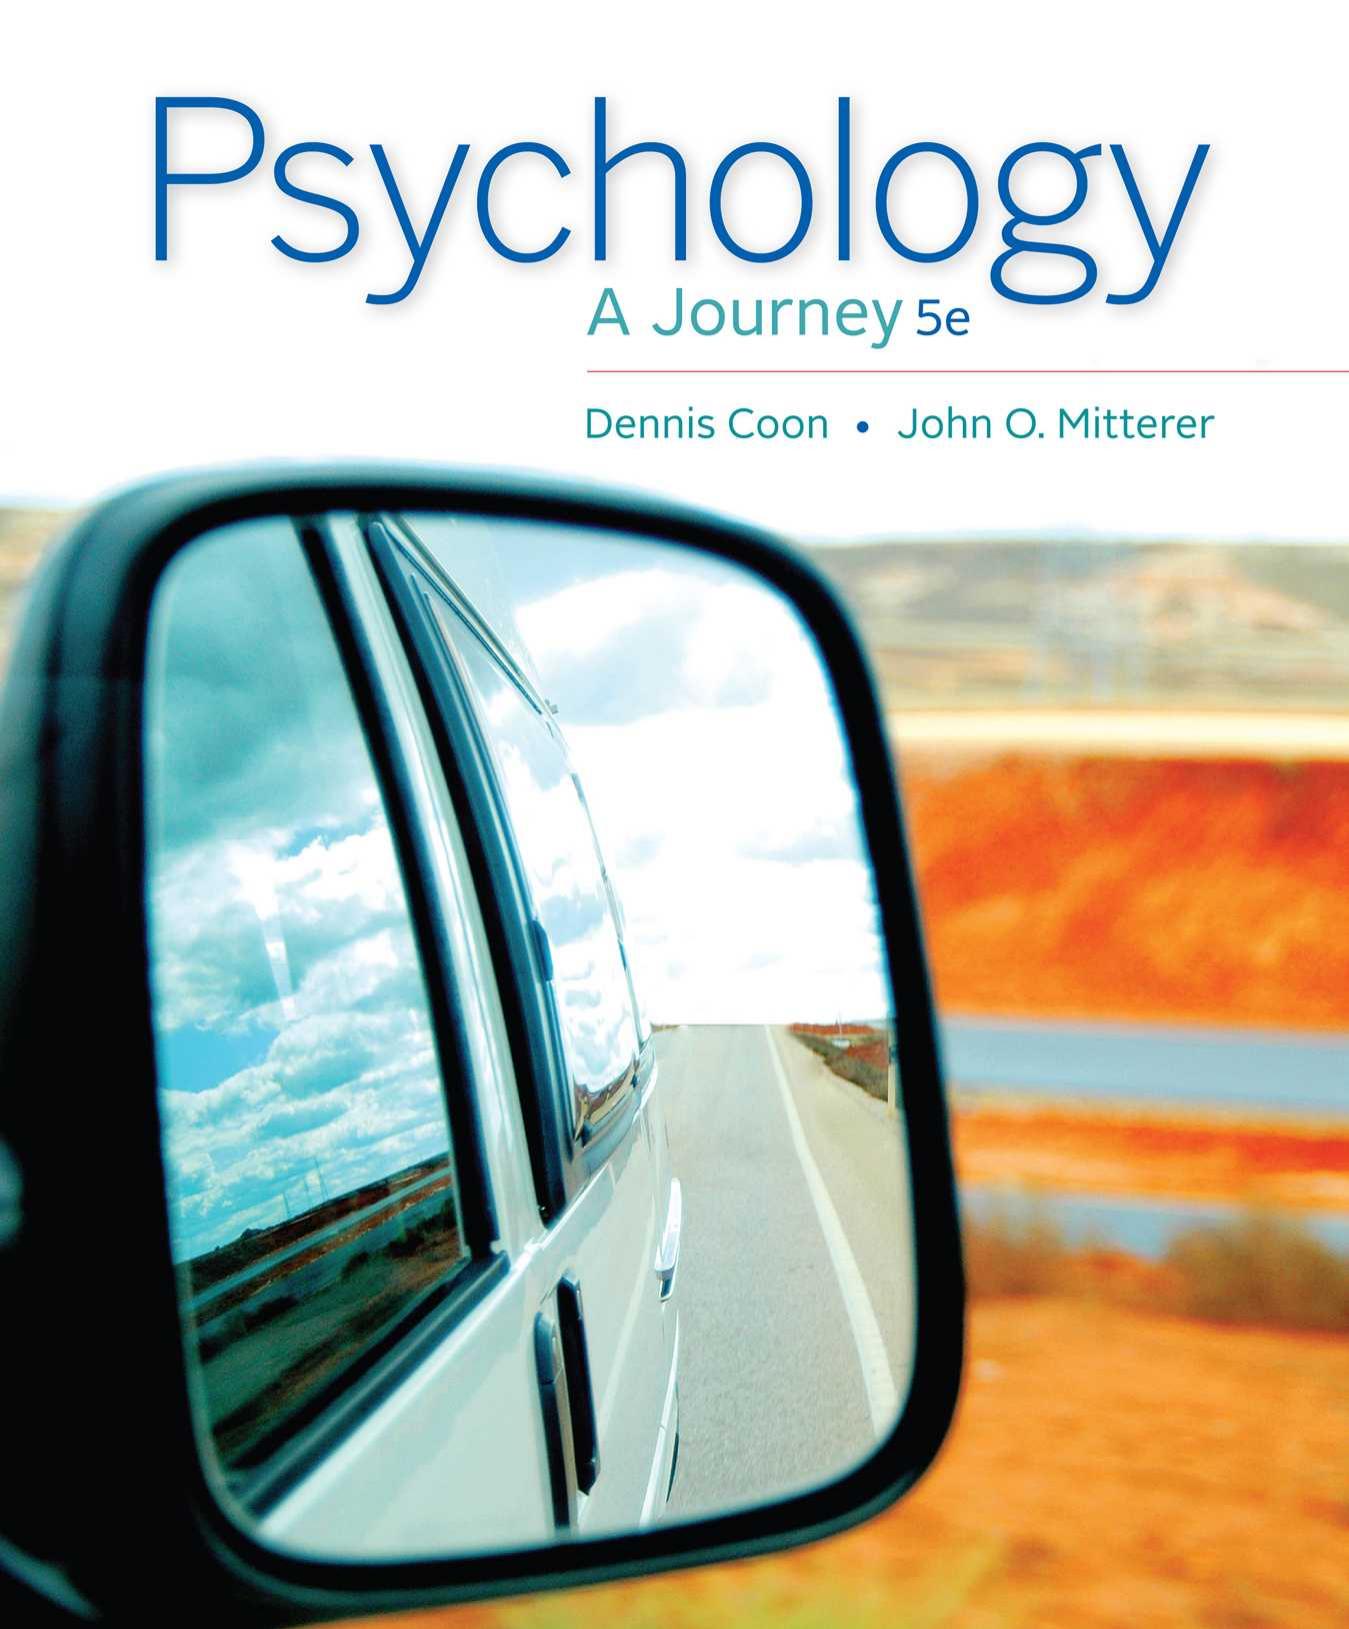 Psychology:  A Journey (Coon), 5th ed.